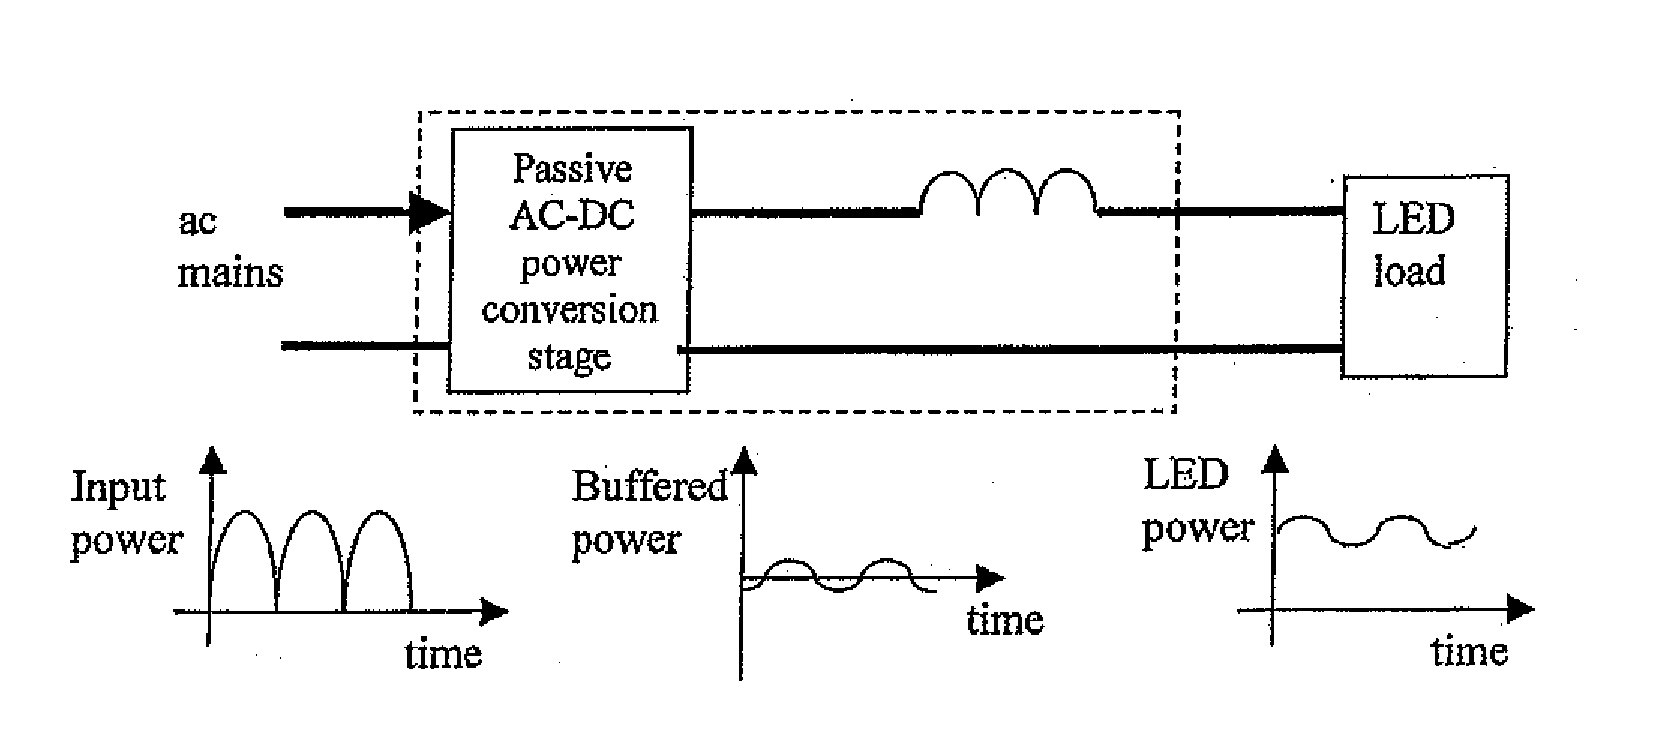 Apparatus and methods of operation of passive LED lighting equipment